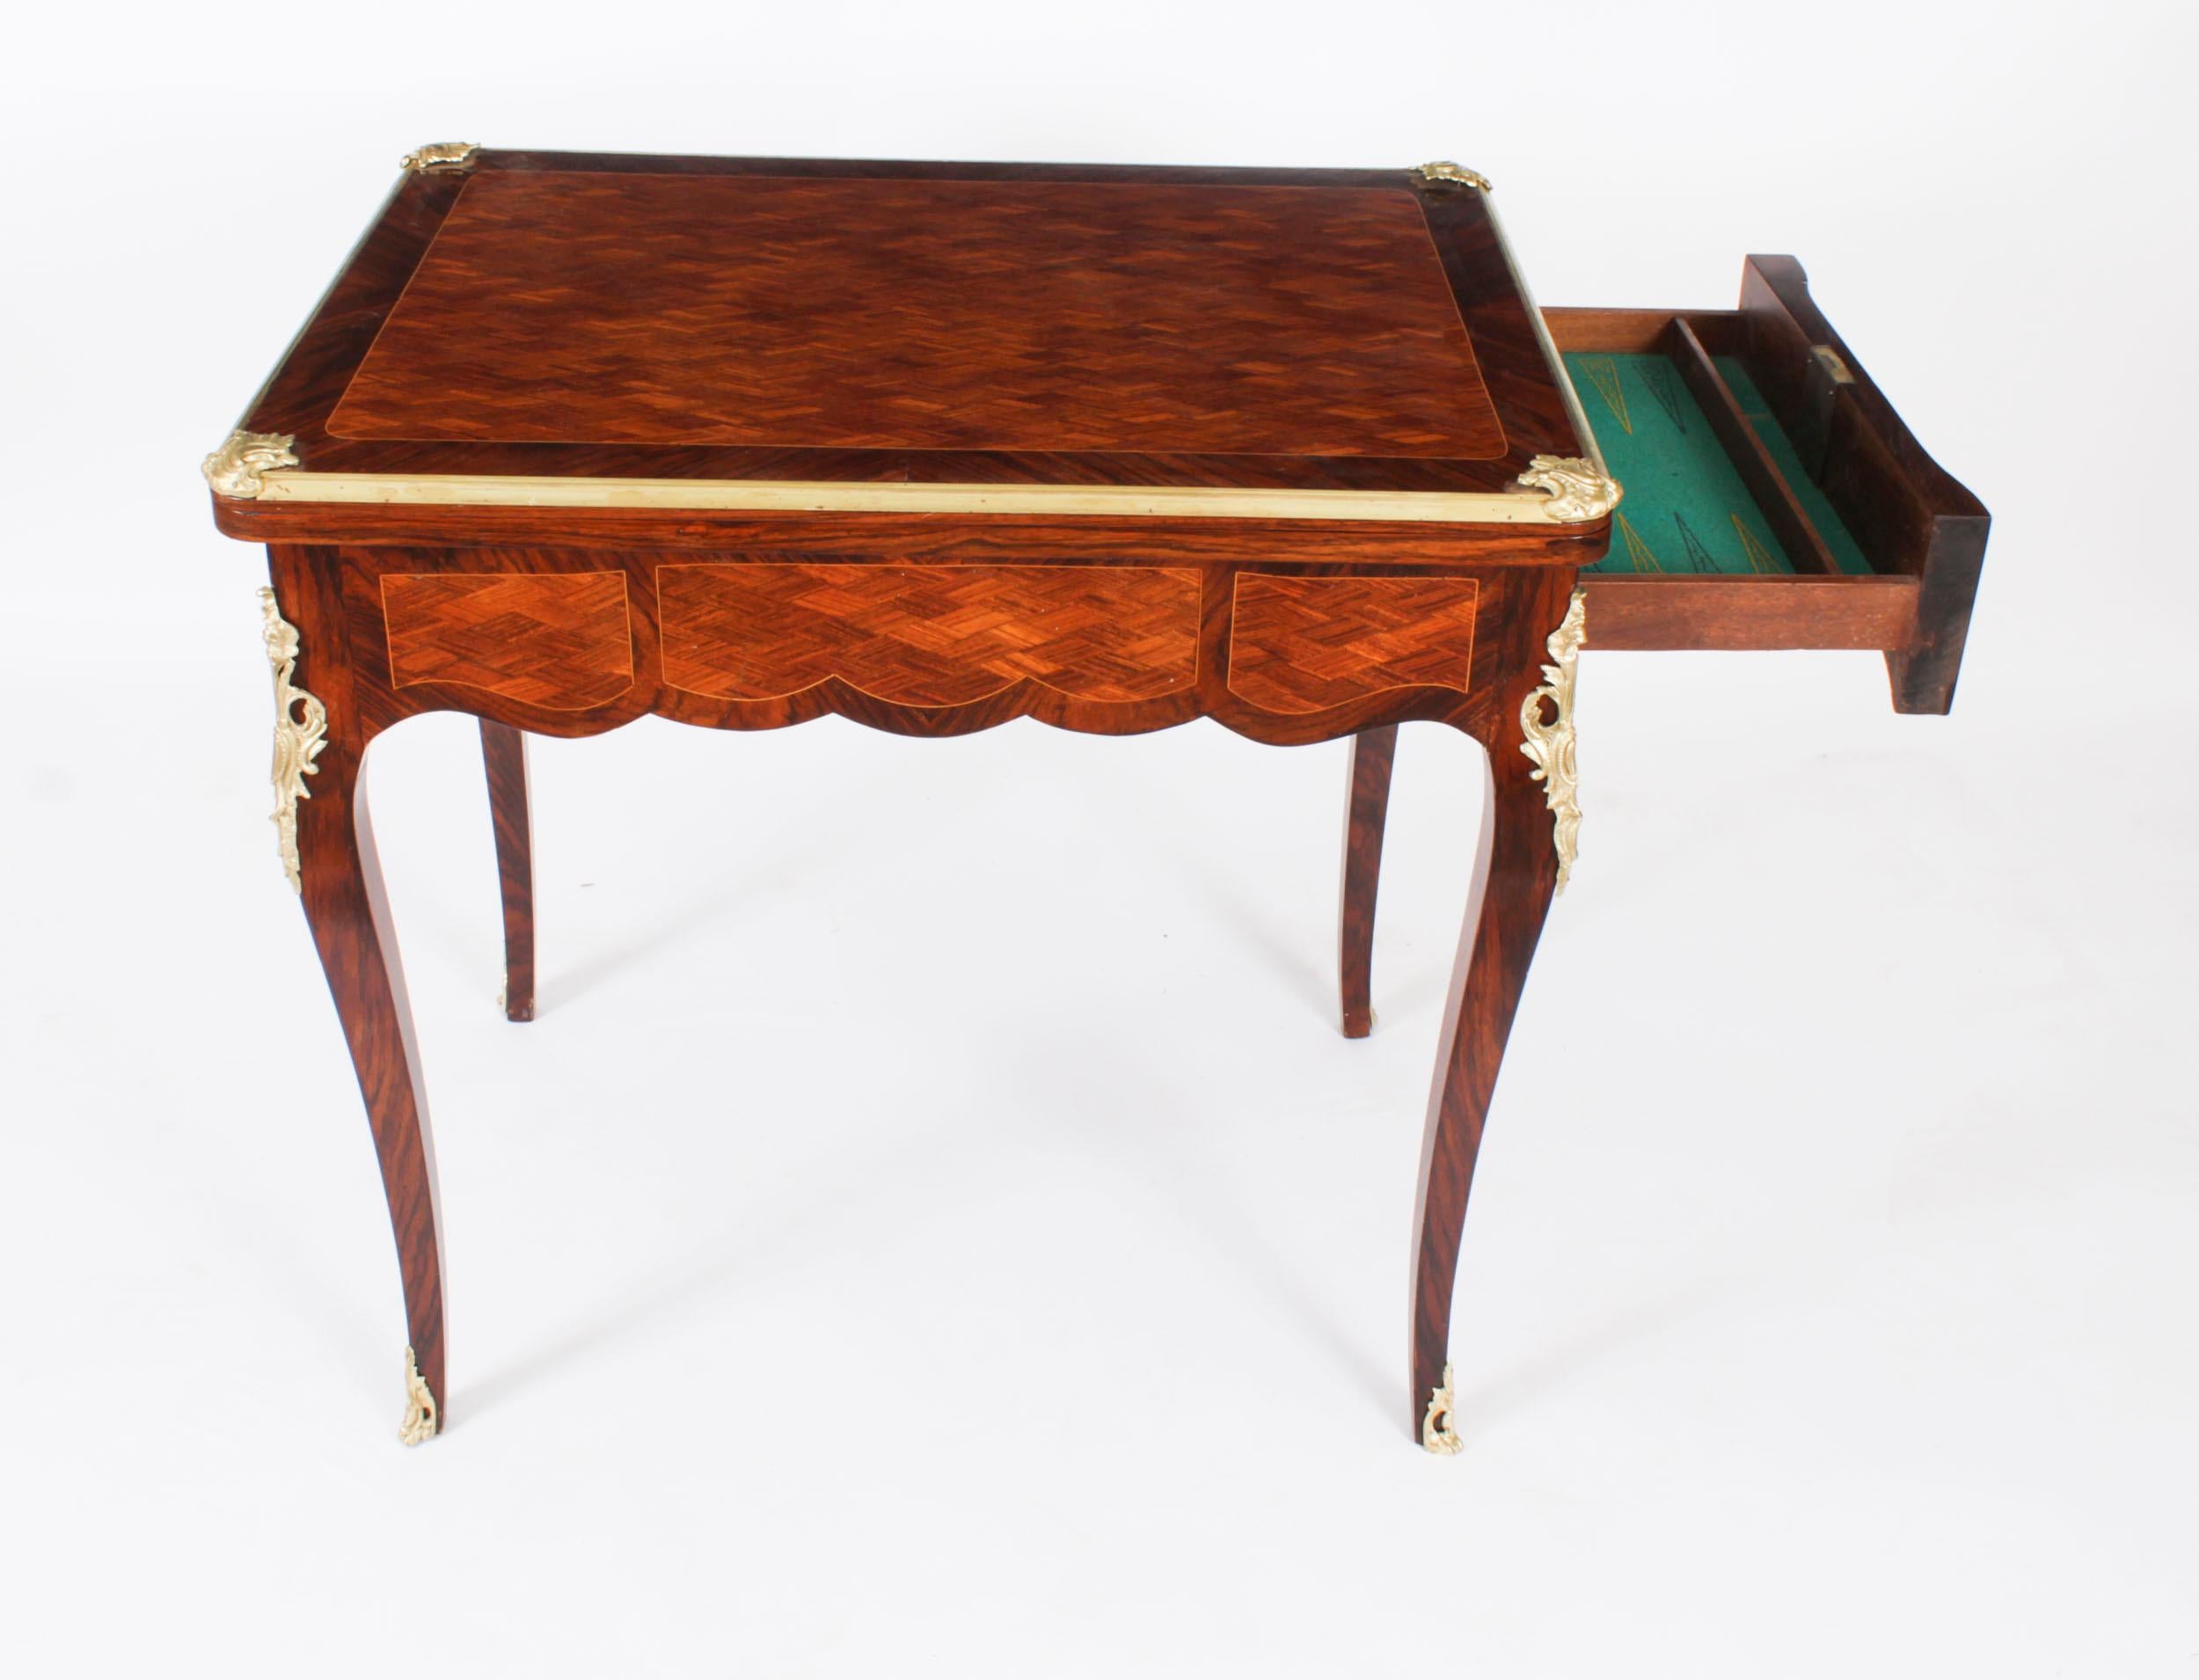 Antique French Burr Walnut Parquetry Card Backgammon Table 19th Century For Sale 11